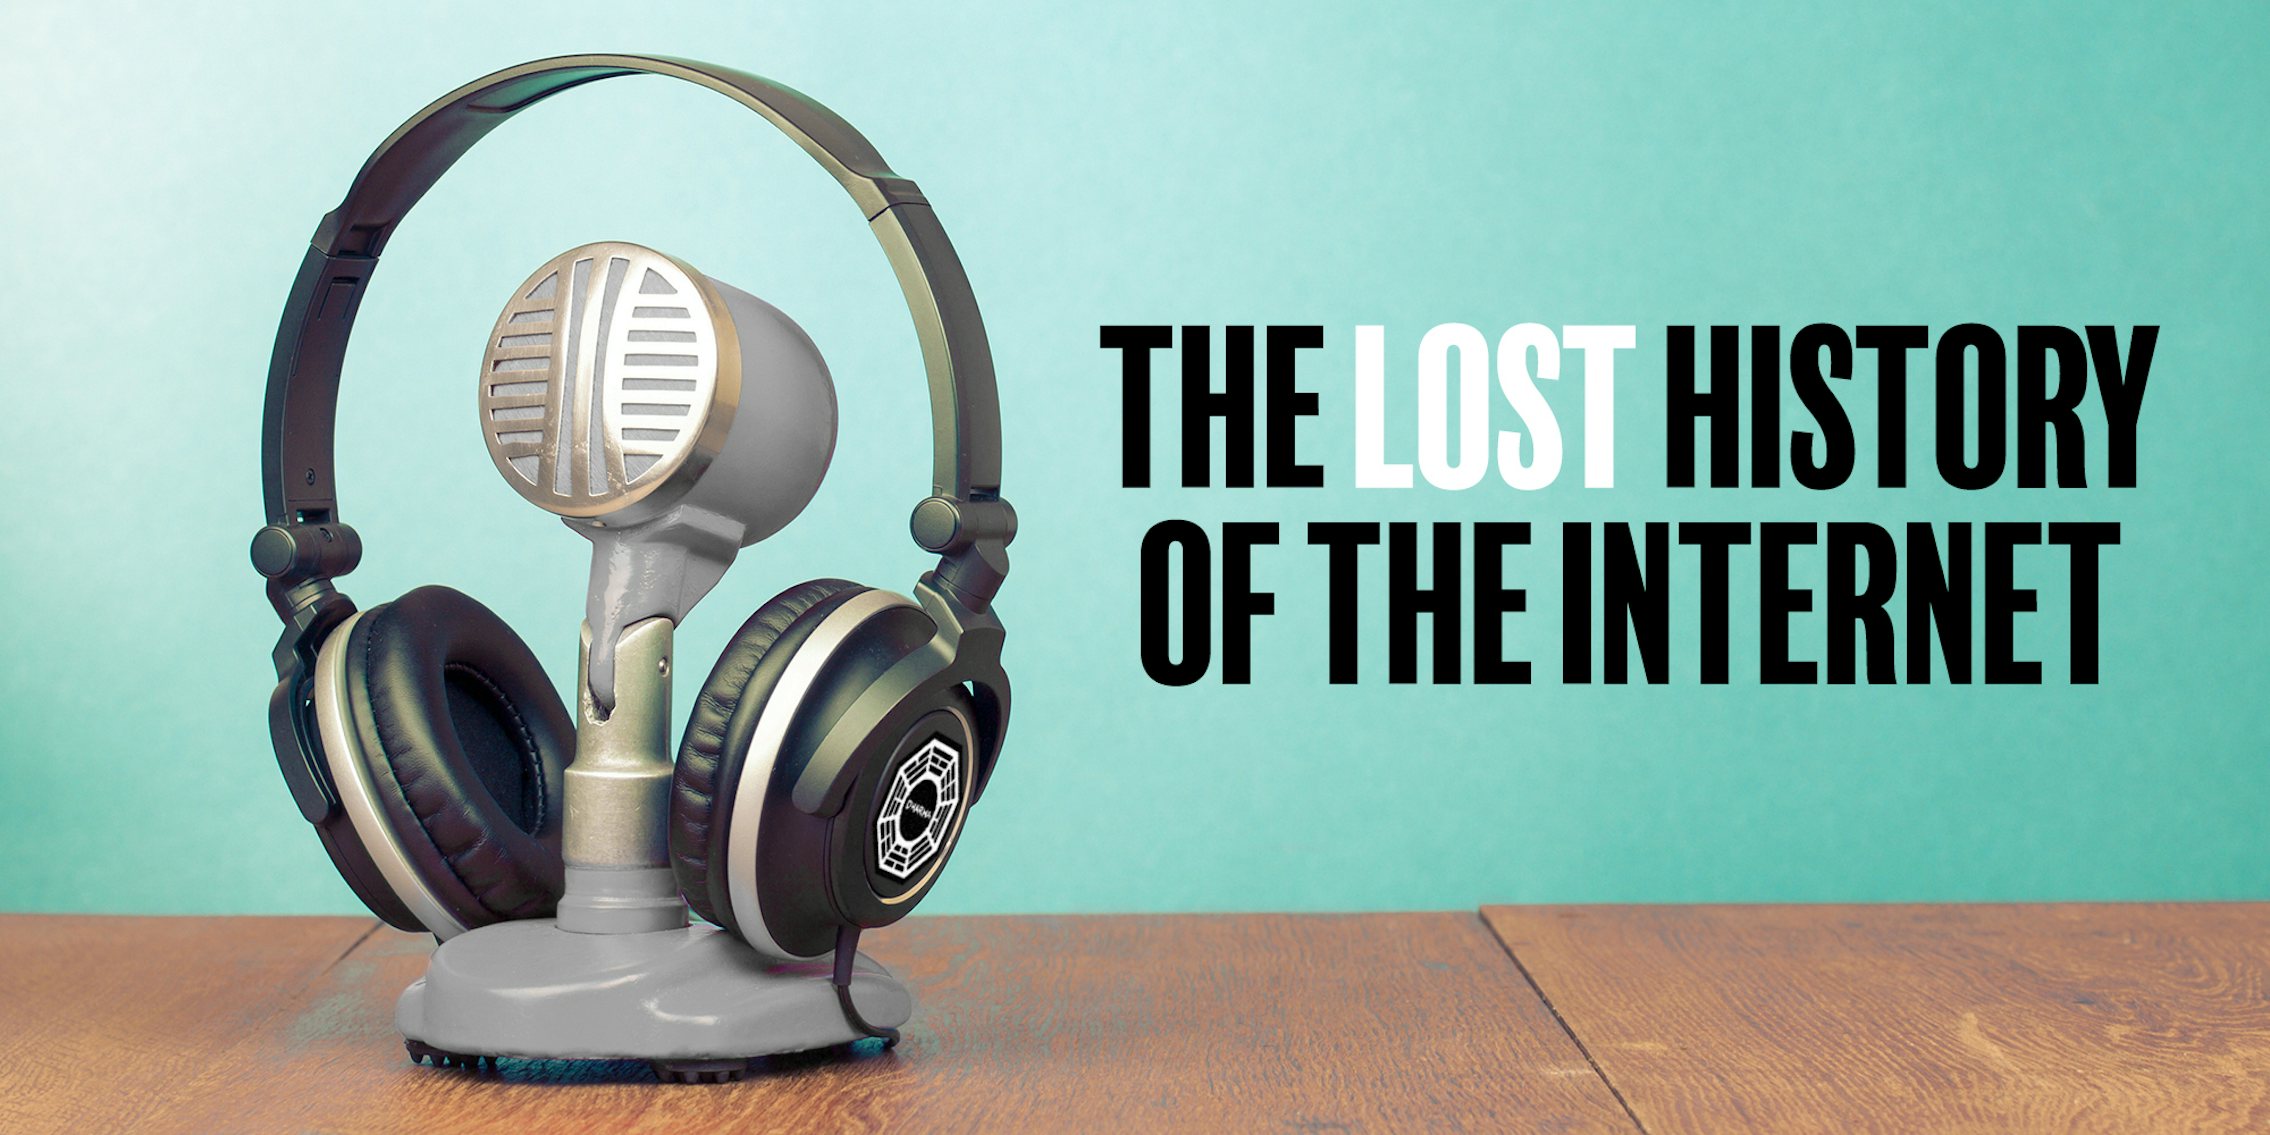 Headphones with DHARMA initiative logo on side perched on condenser microphone stand with caption 'The LOST History of the Internet'